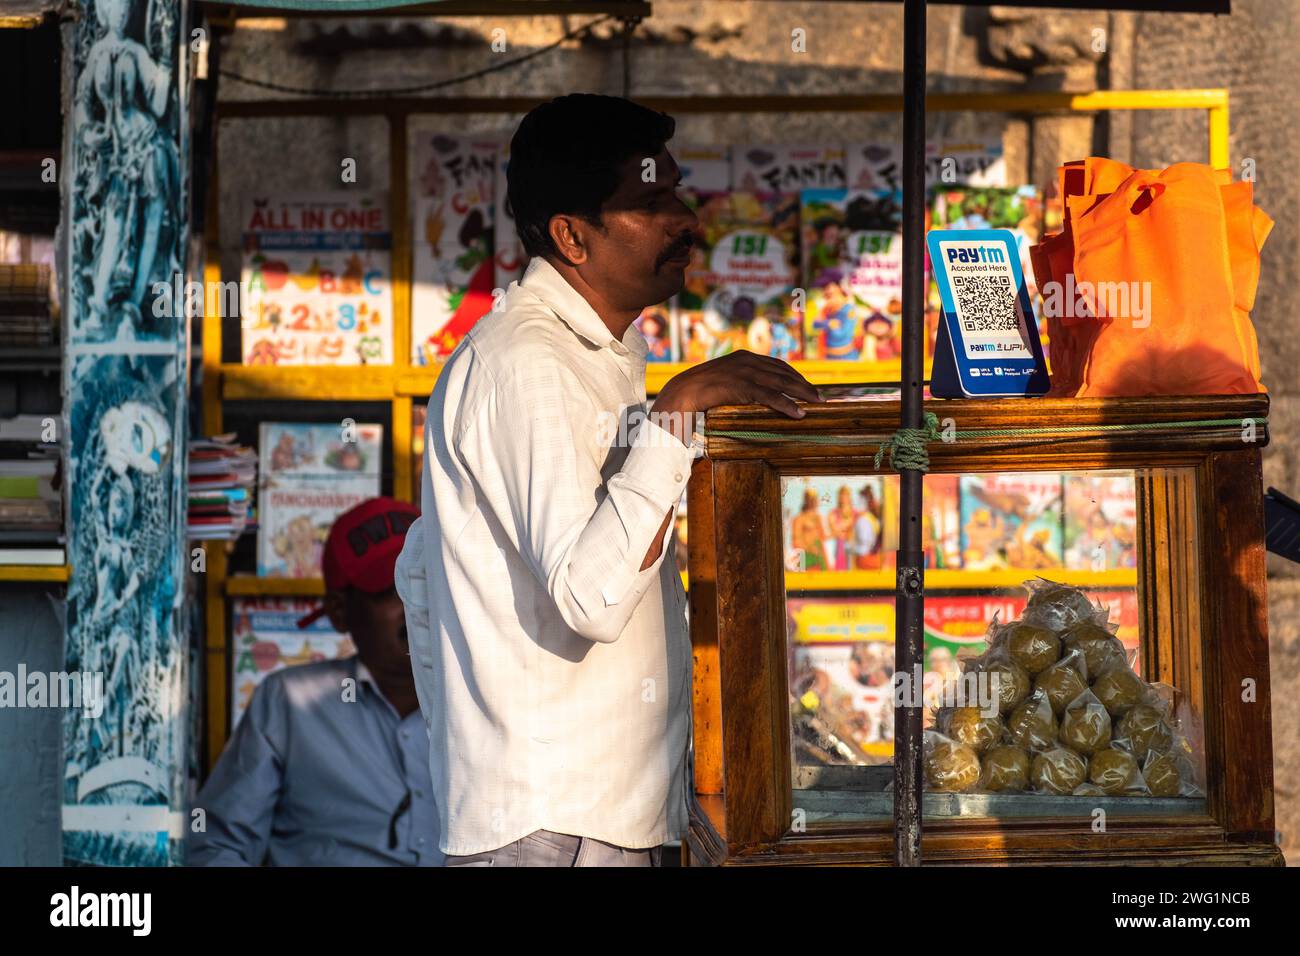 Belur, Karnataka, India - January 9 2023: An Indian street vendor with a paytm upi QR code for payments at his colorful snack stall. Stock Photo